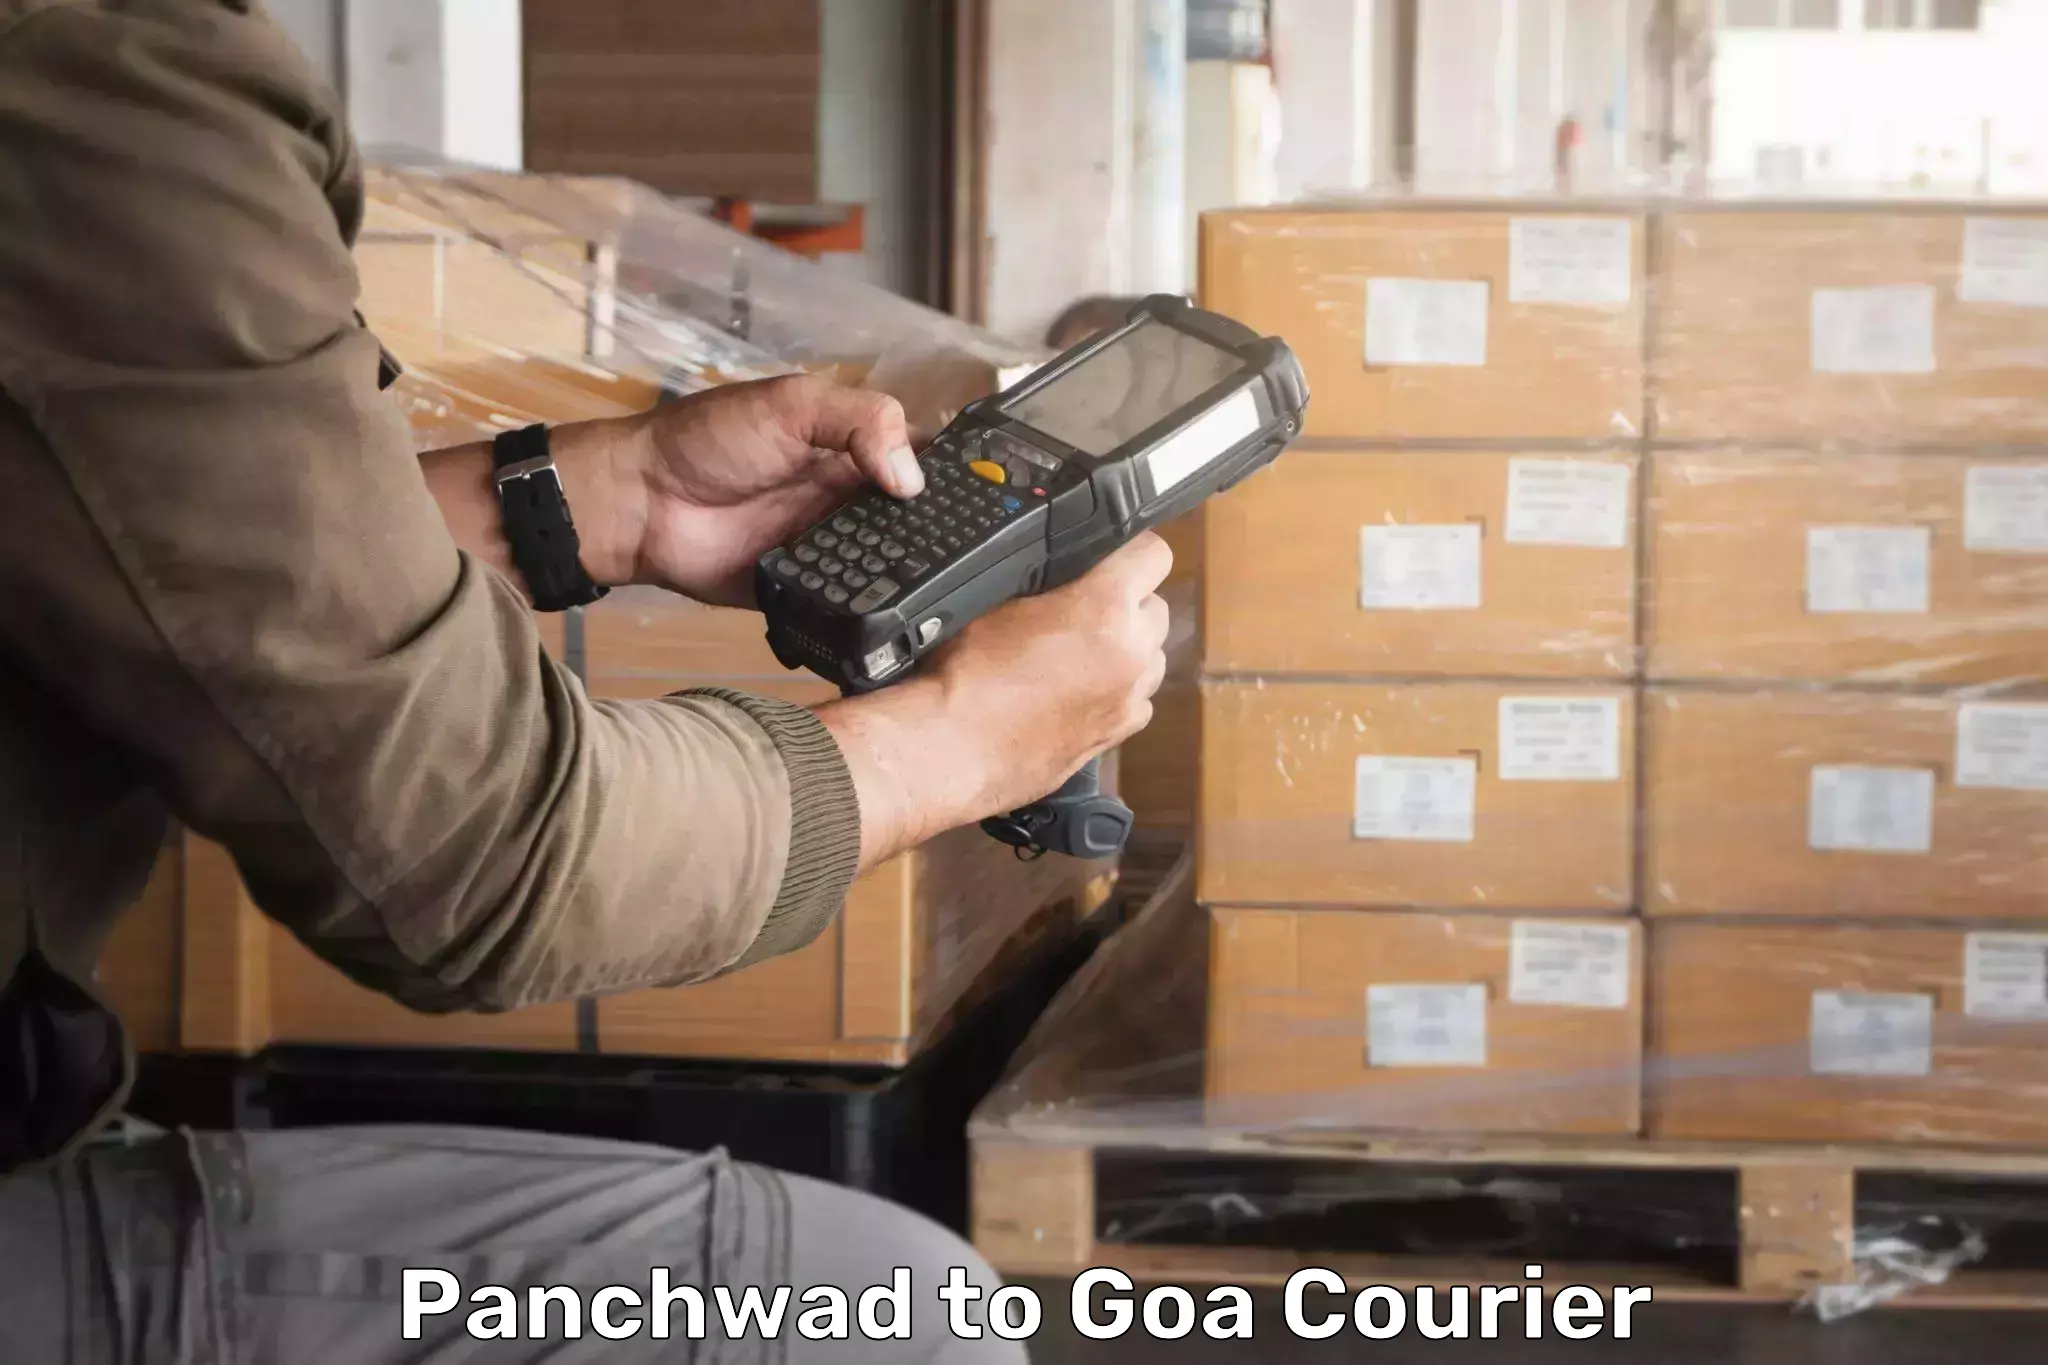 International courier networks Panchwad to Goa University